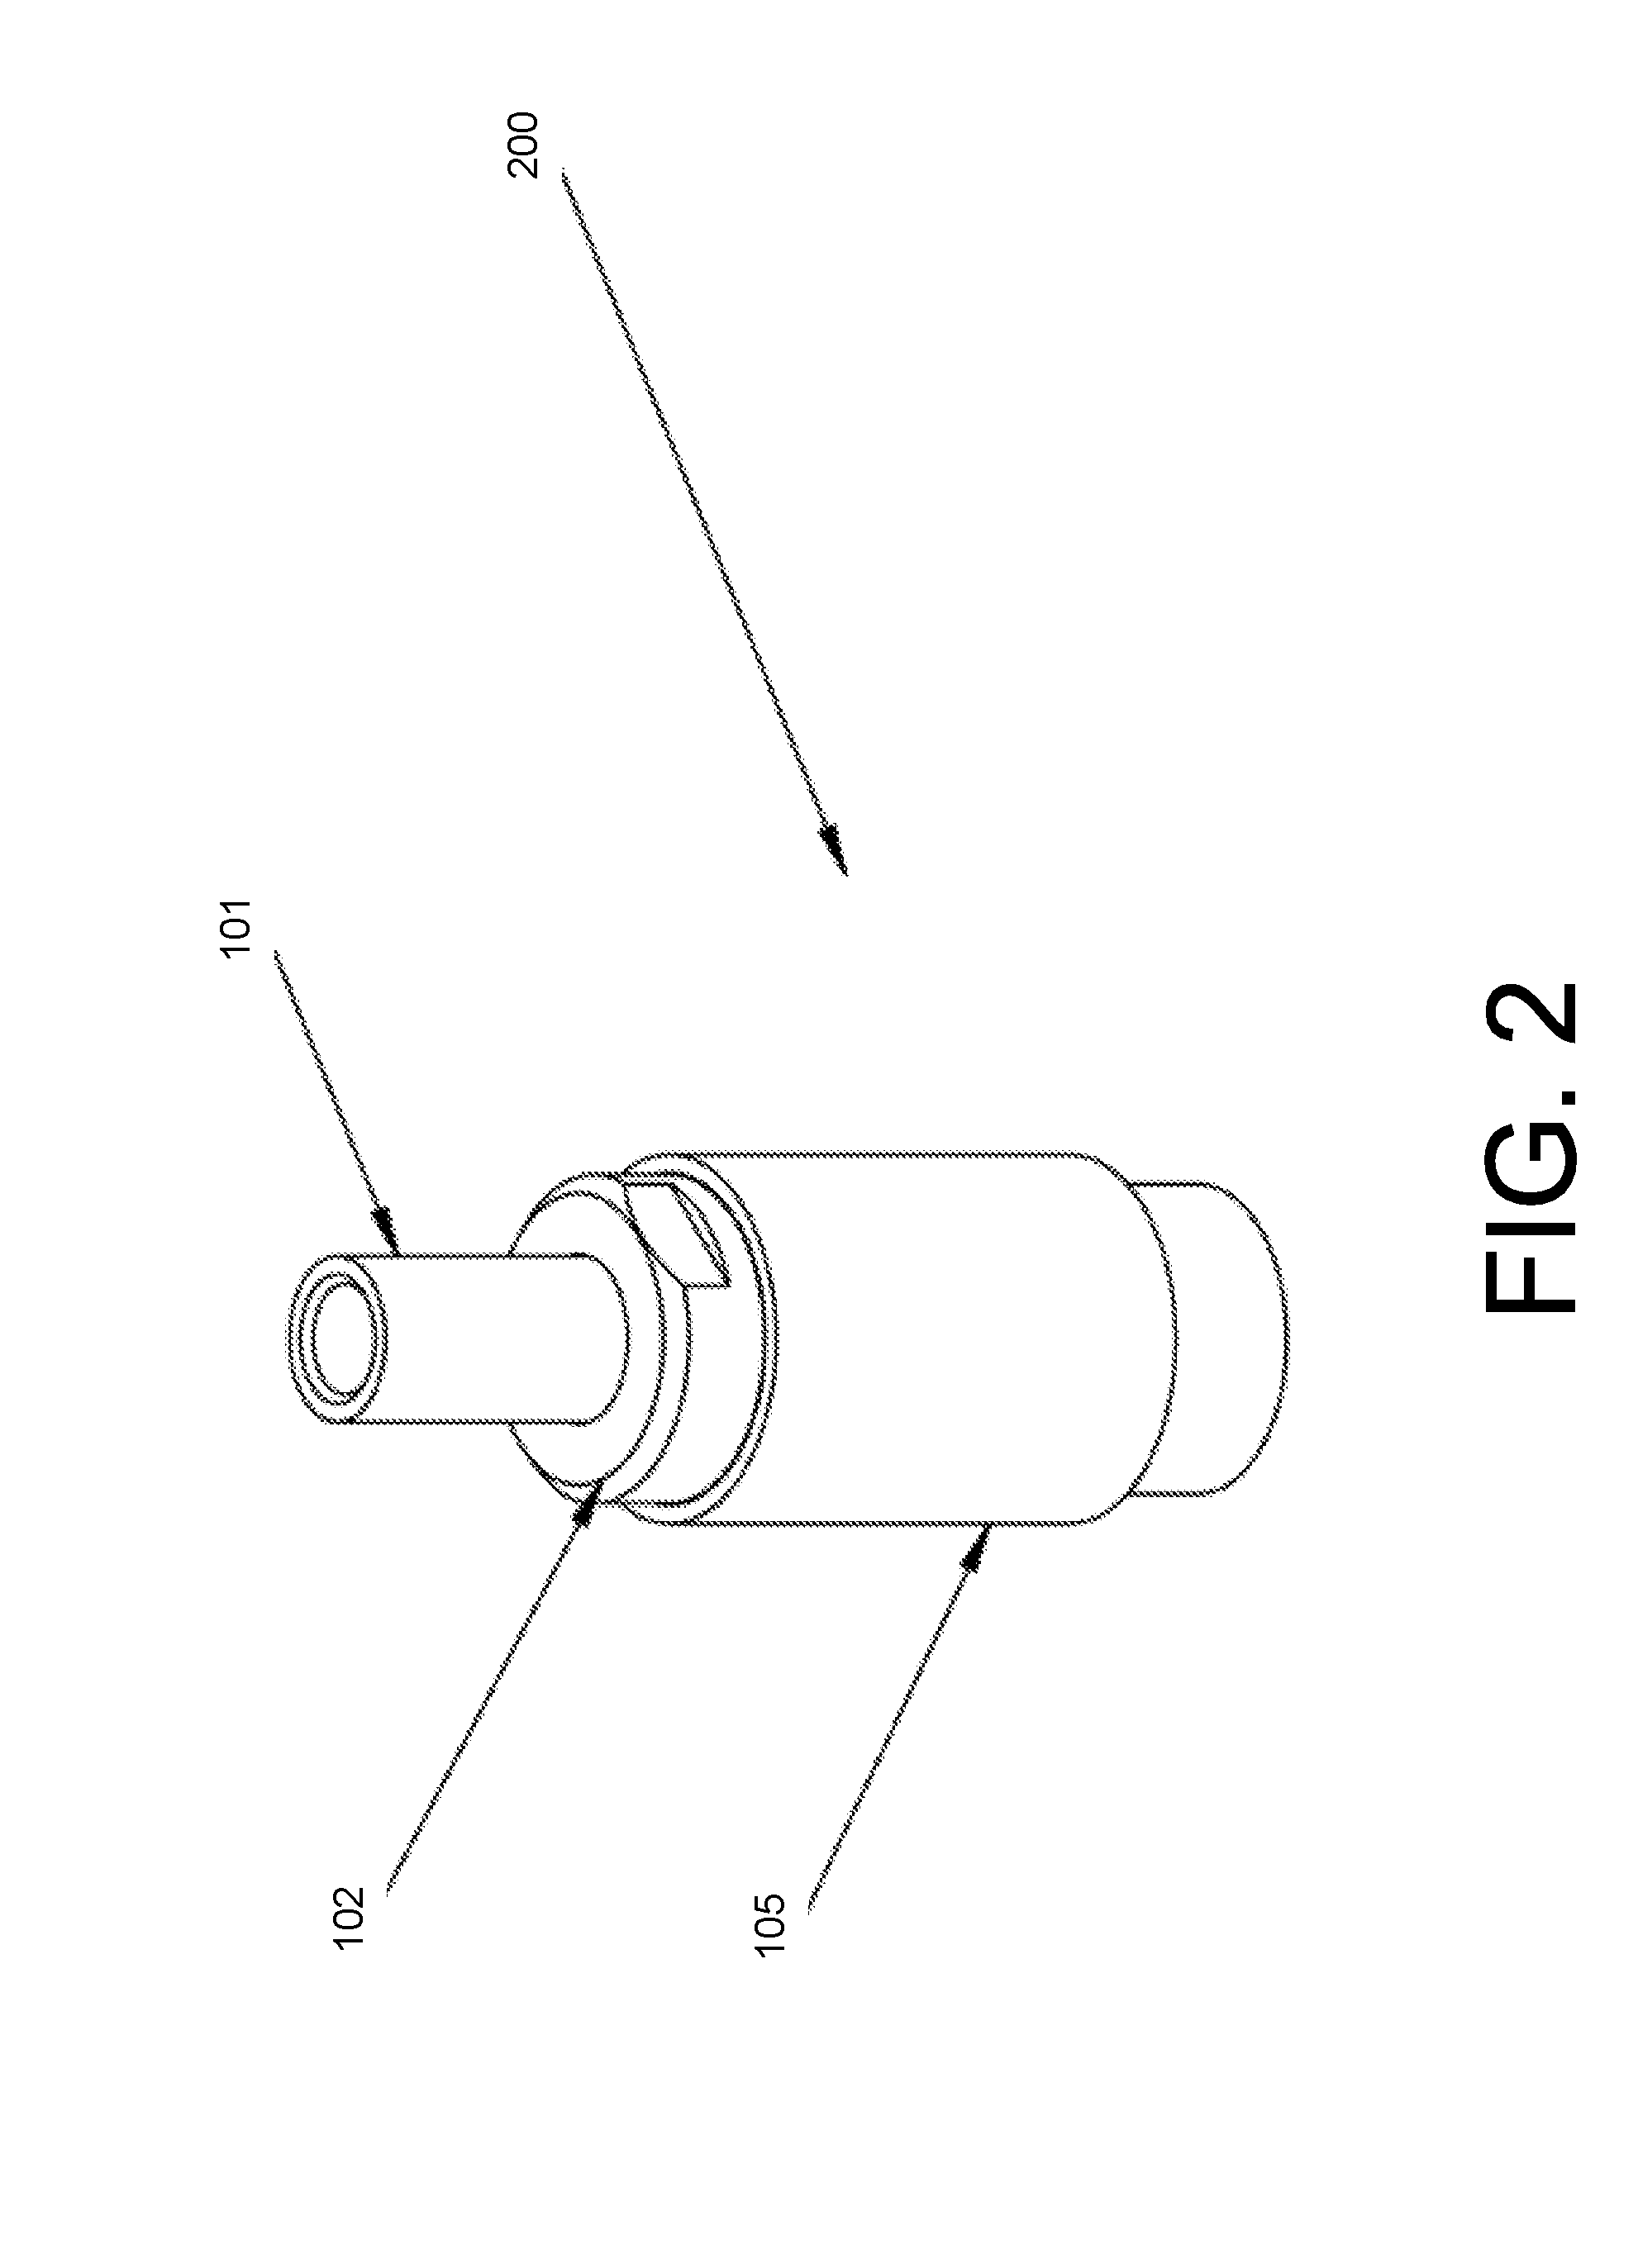 Dual-conductor suspension system for an electrical apparatus